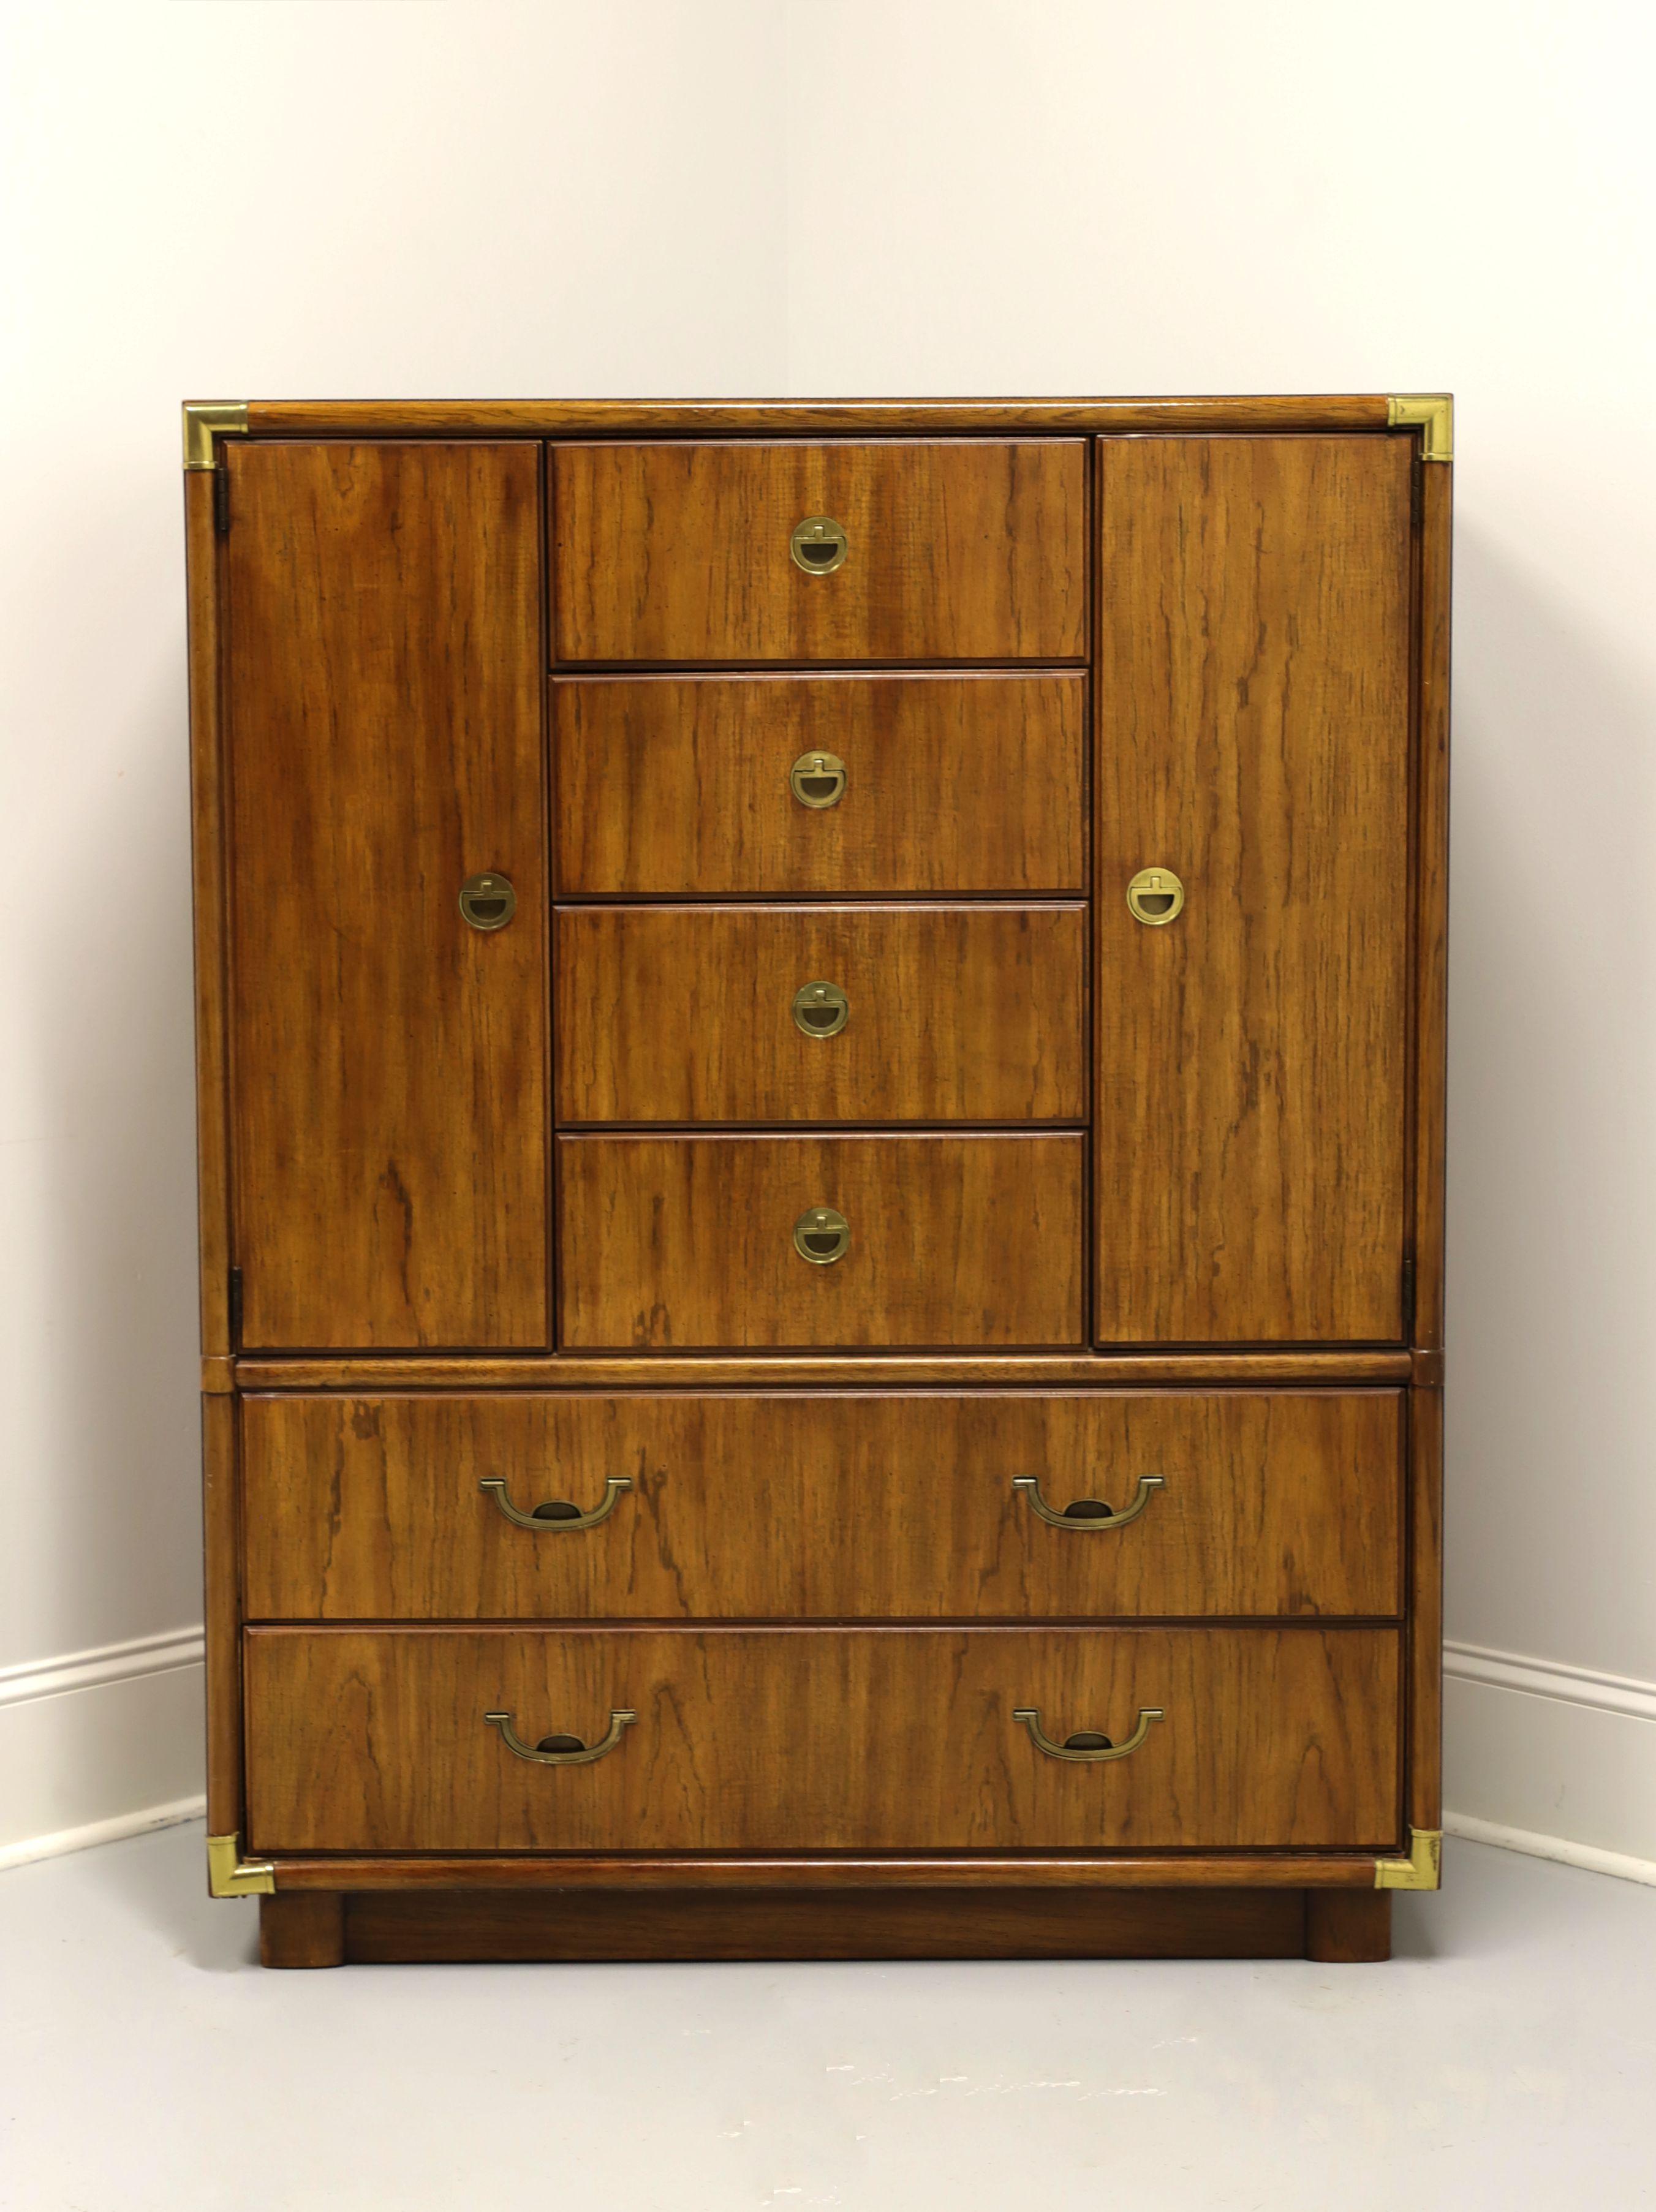 A campaign style gentleman's chest by Drexel, from their Accolade Collection. Pecan with brass accents and hardware. Features four upper center drawers over two lower drawers, all of dovetail construction. Upper center drawers are flanked by dual